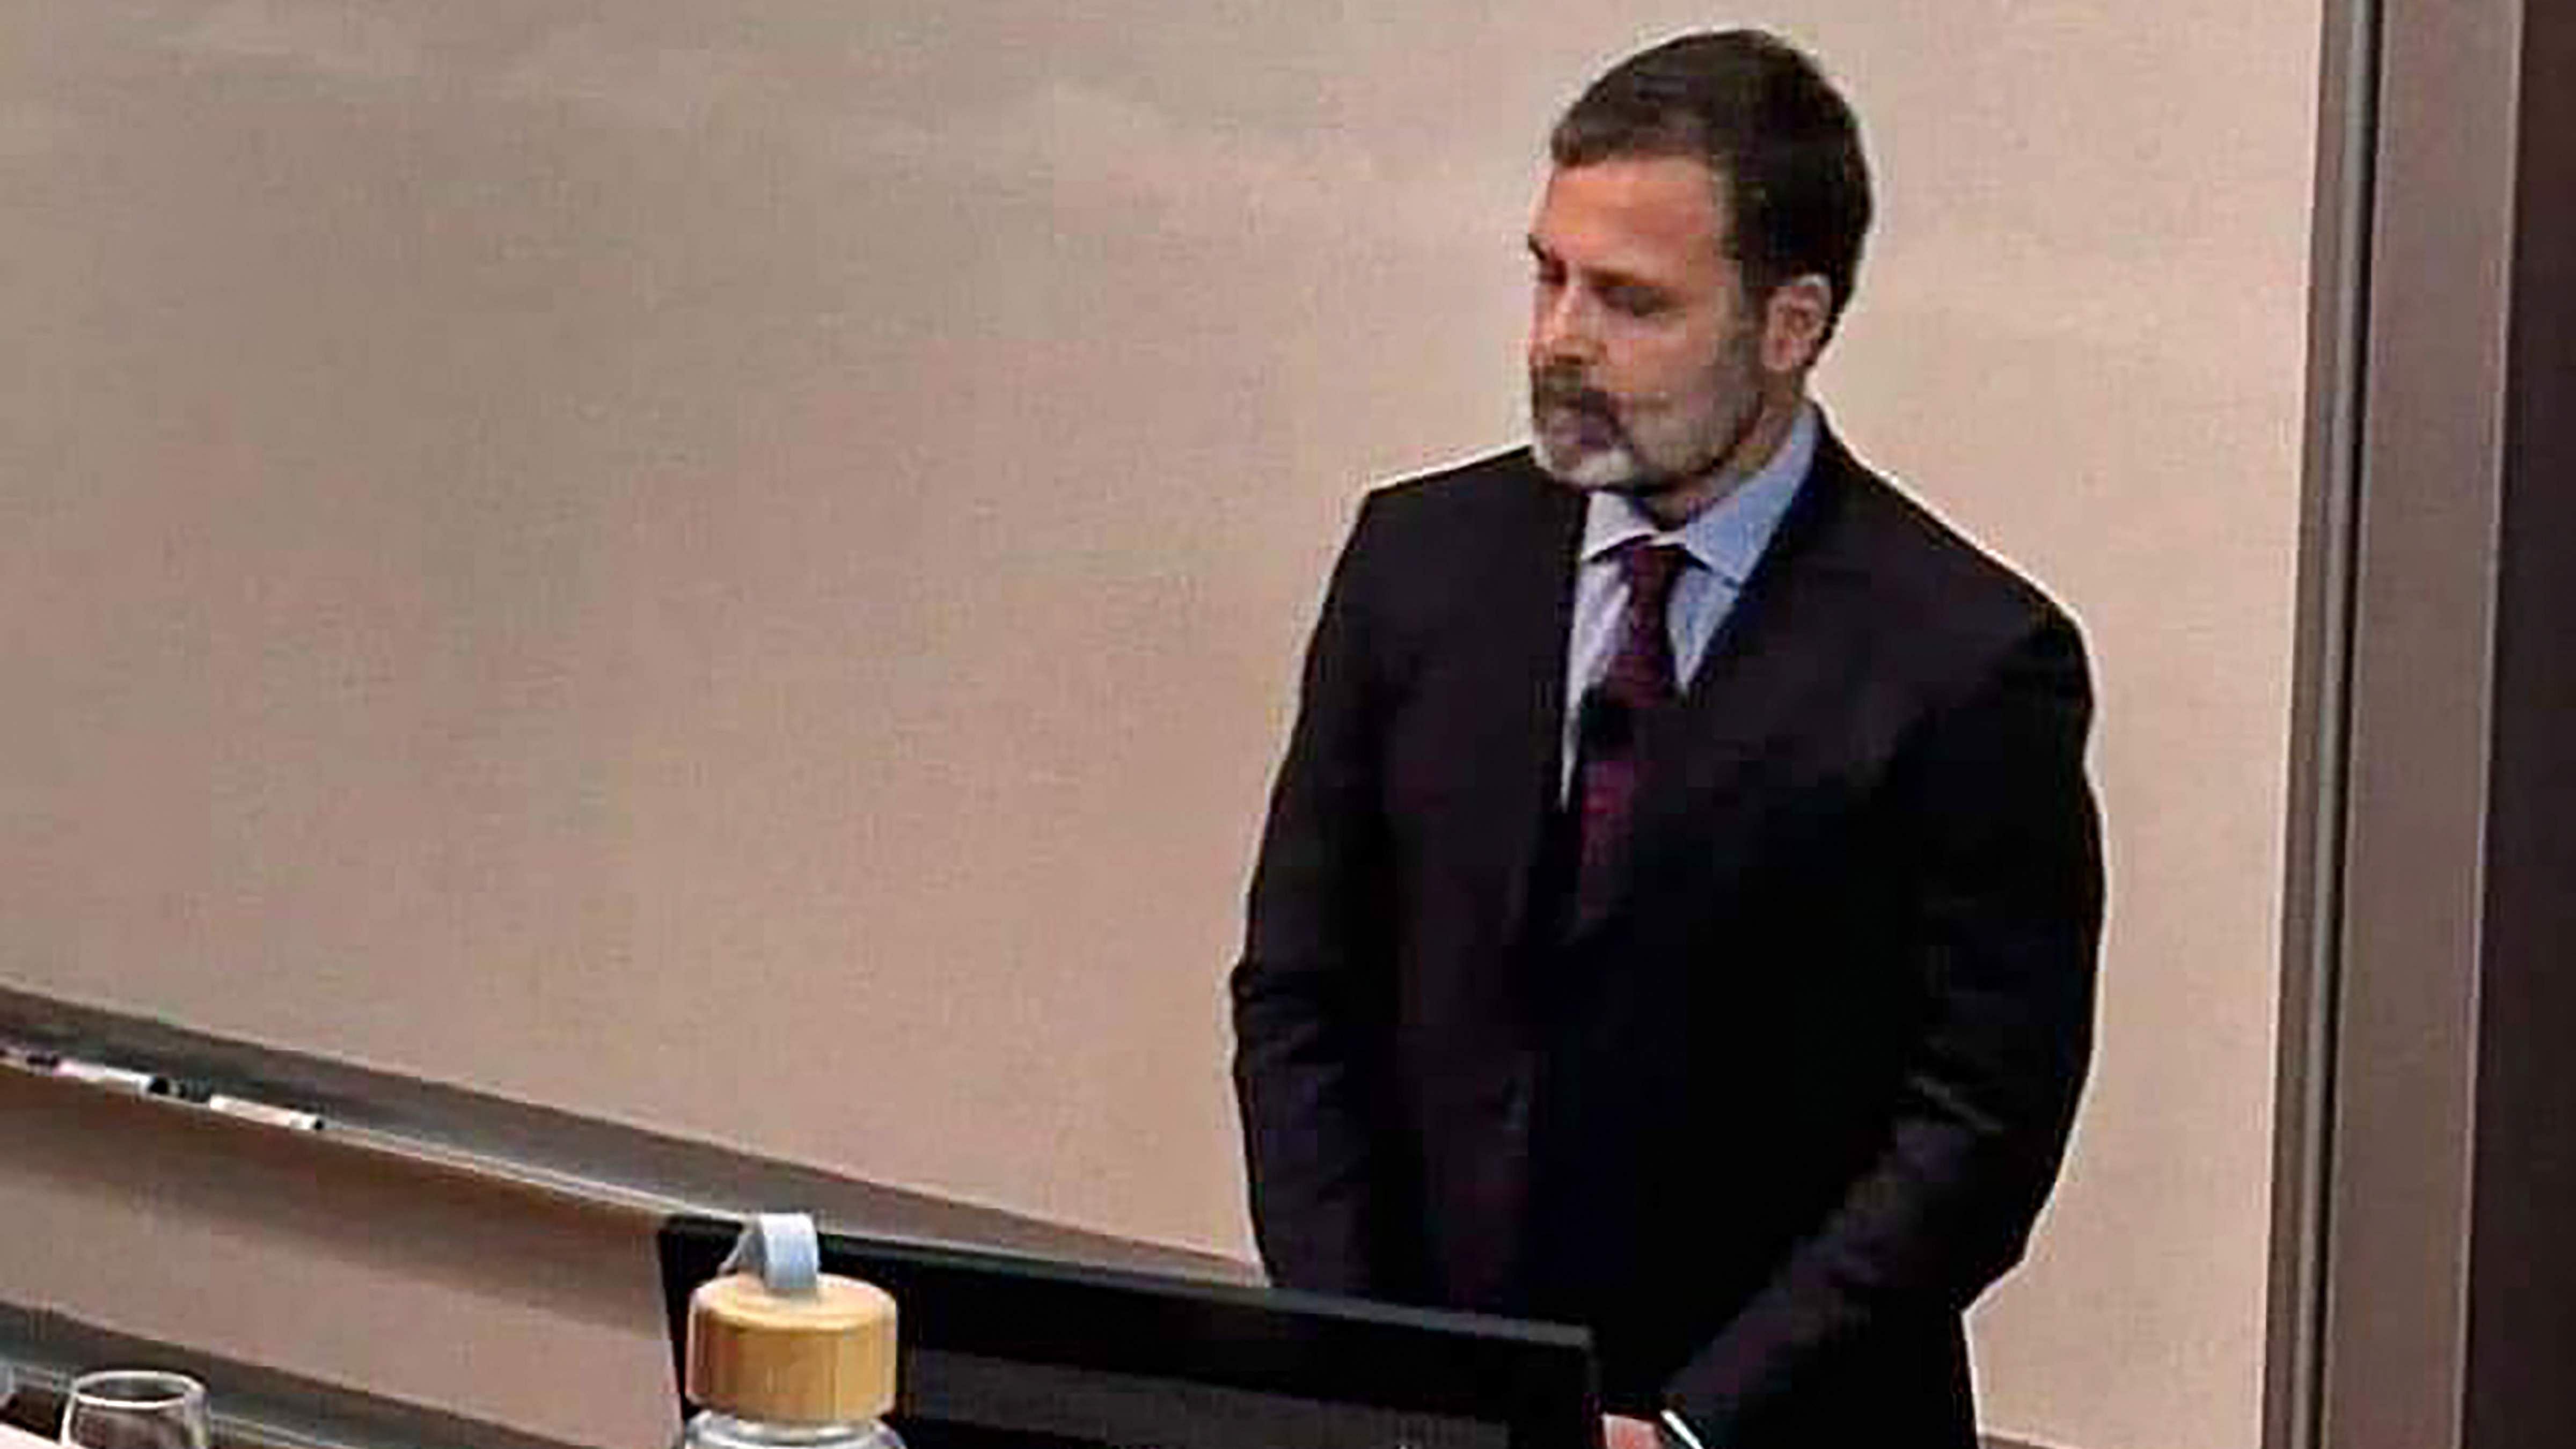 Congress leader Rahul Gandhi, in a new look with a trimmed beard, during an event at the University of Cambridge. Credit: PTI Photo